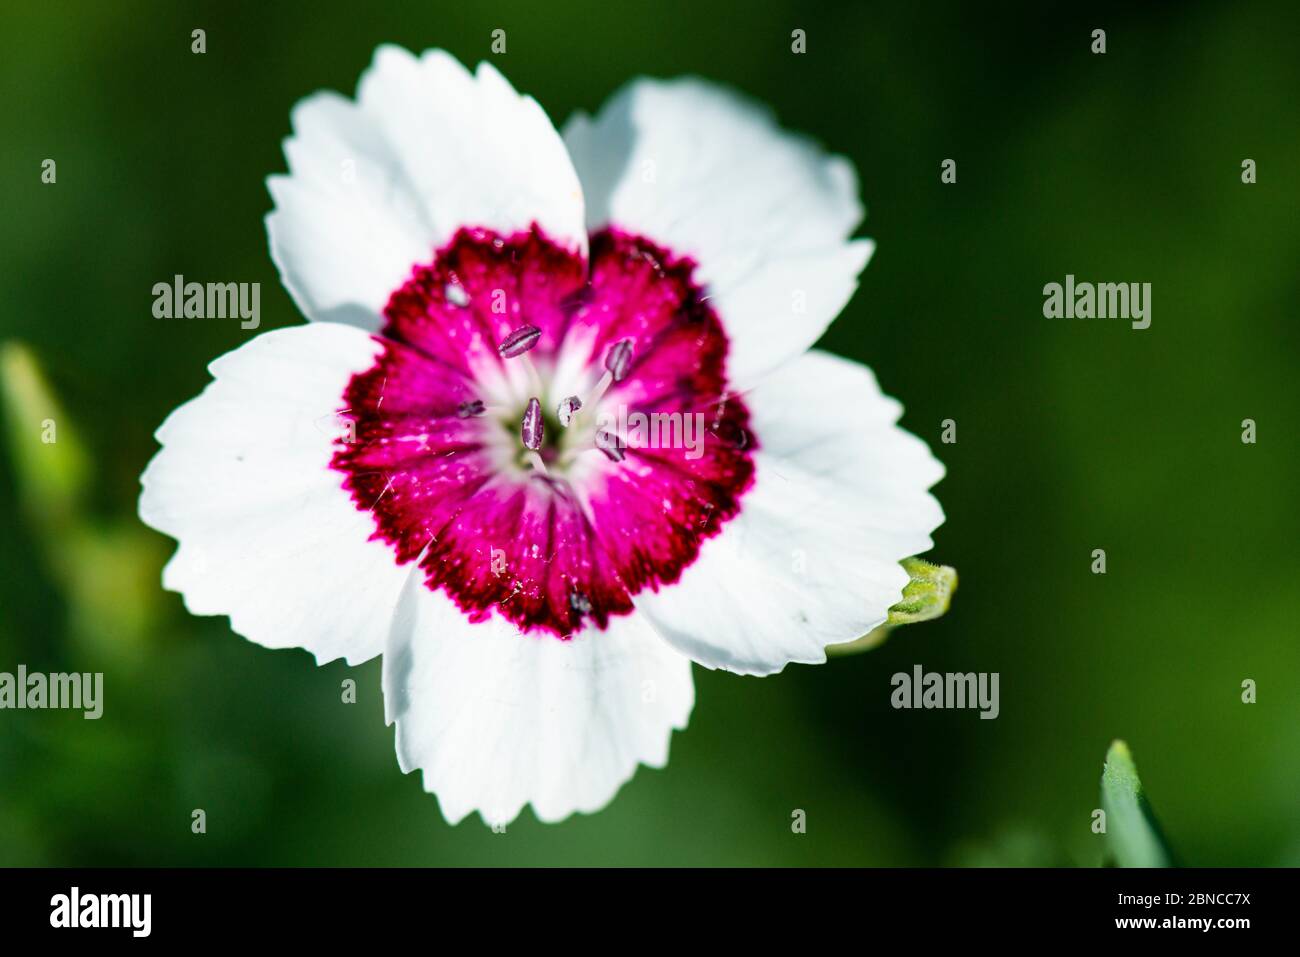 The flower of a Dianthus deltoides 'Arctic Fire' Stock Photo